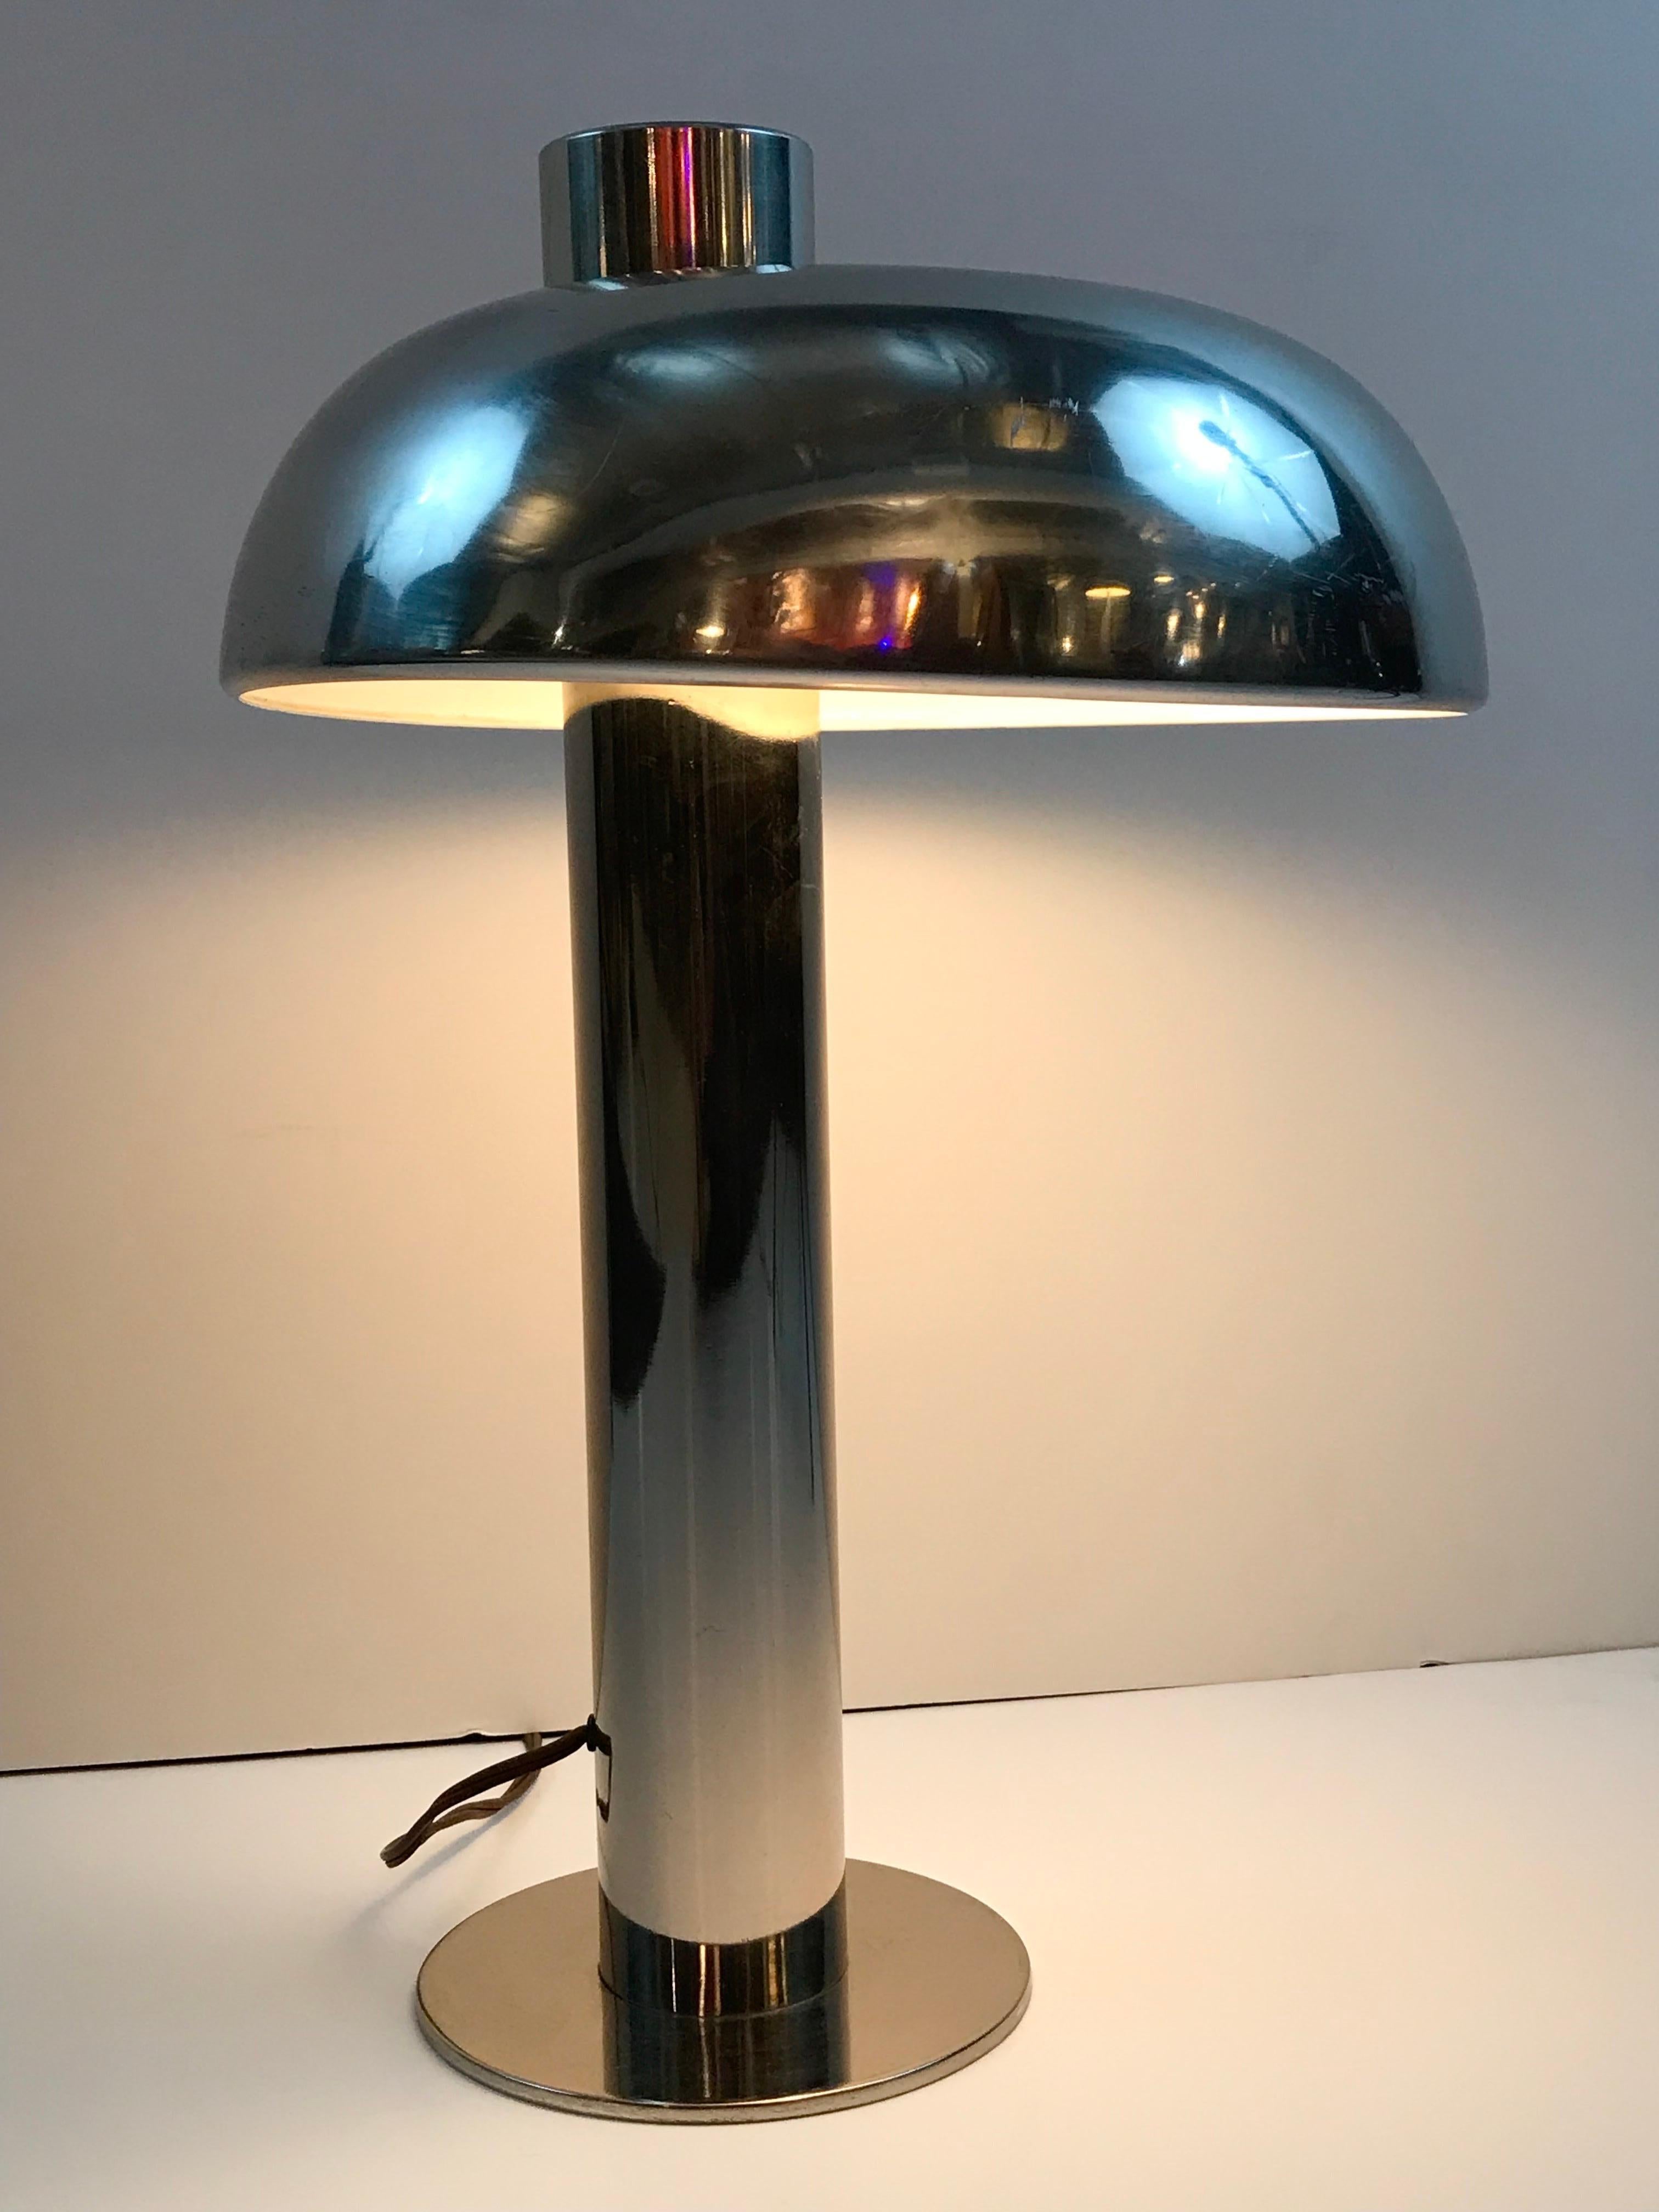 American Rare 1970's Laurel Chromed Steel Desk Lamp with Sculptural Cantilevered Shade